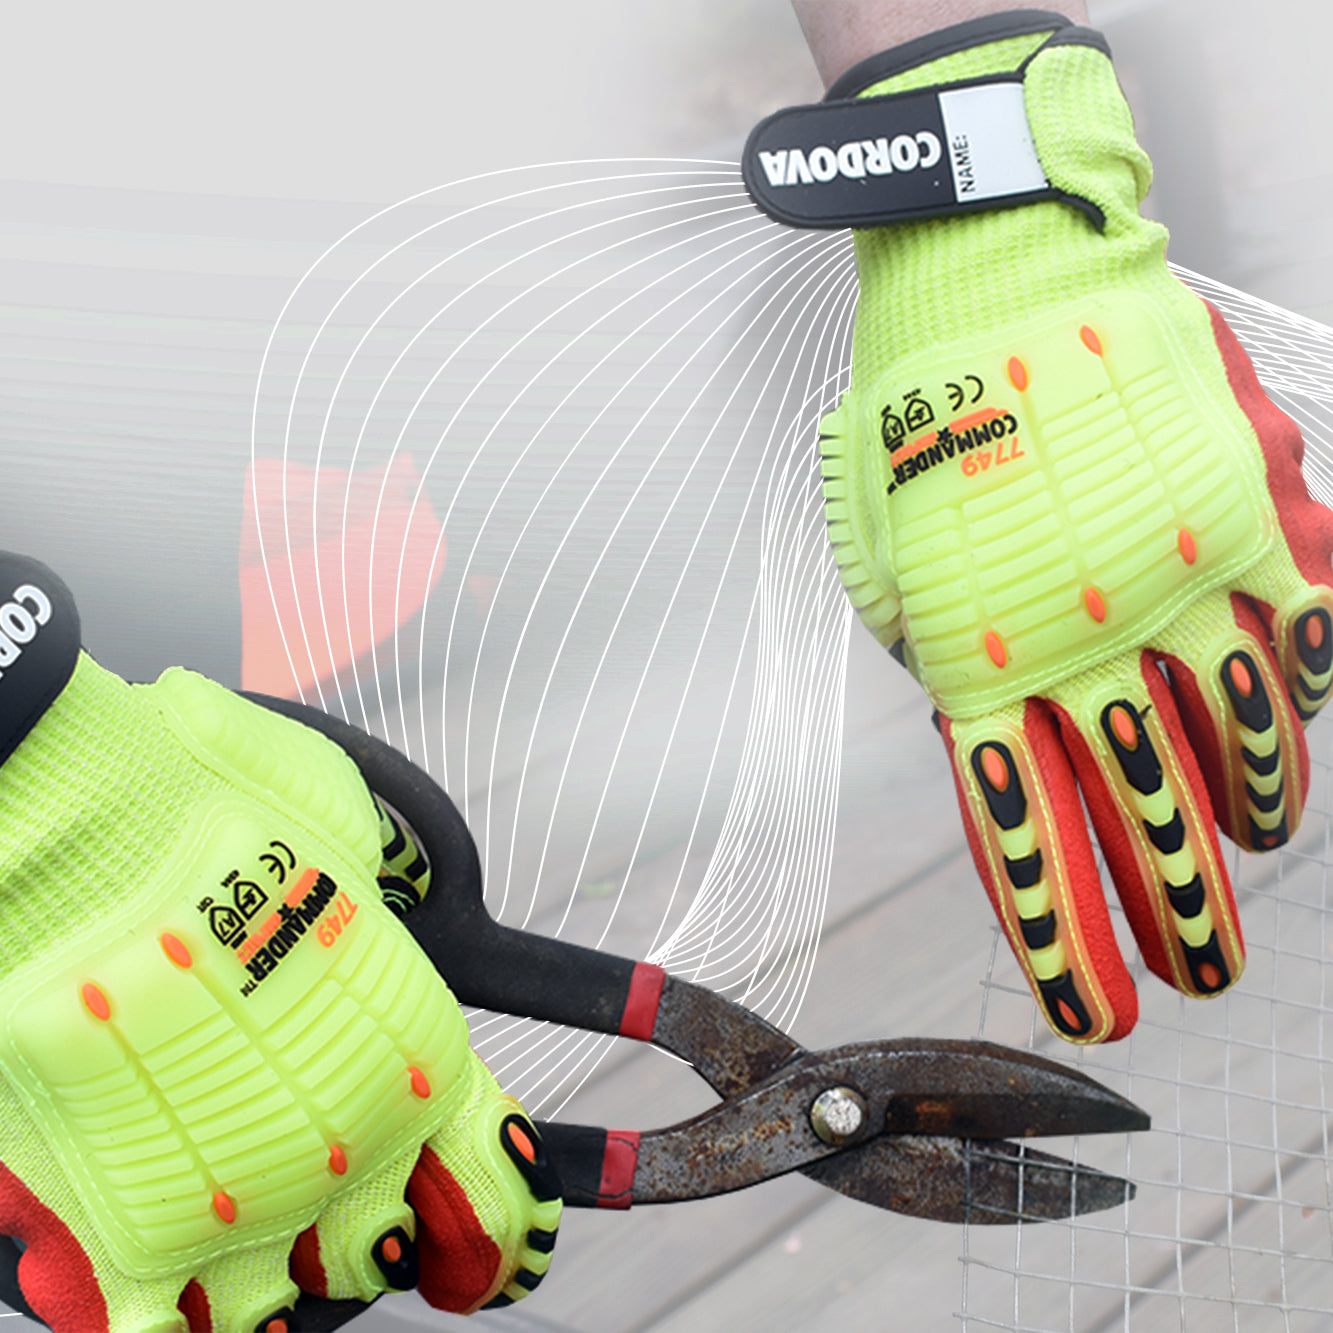 High-Visibility Cut-Resistant Gloves, ANSI Cut Level A7